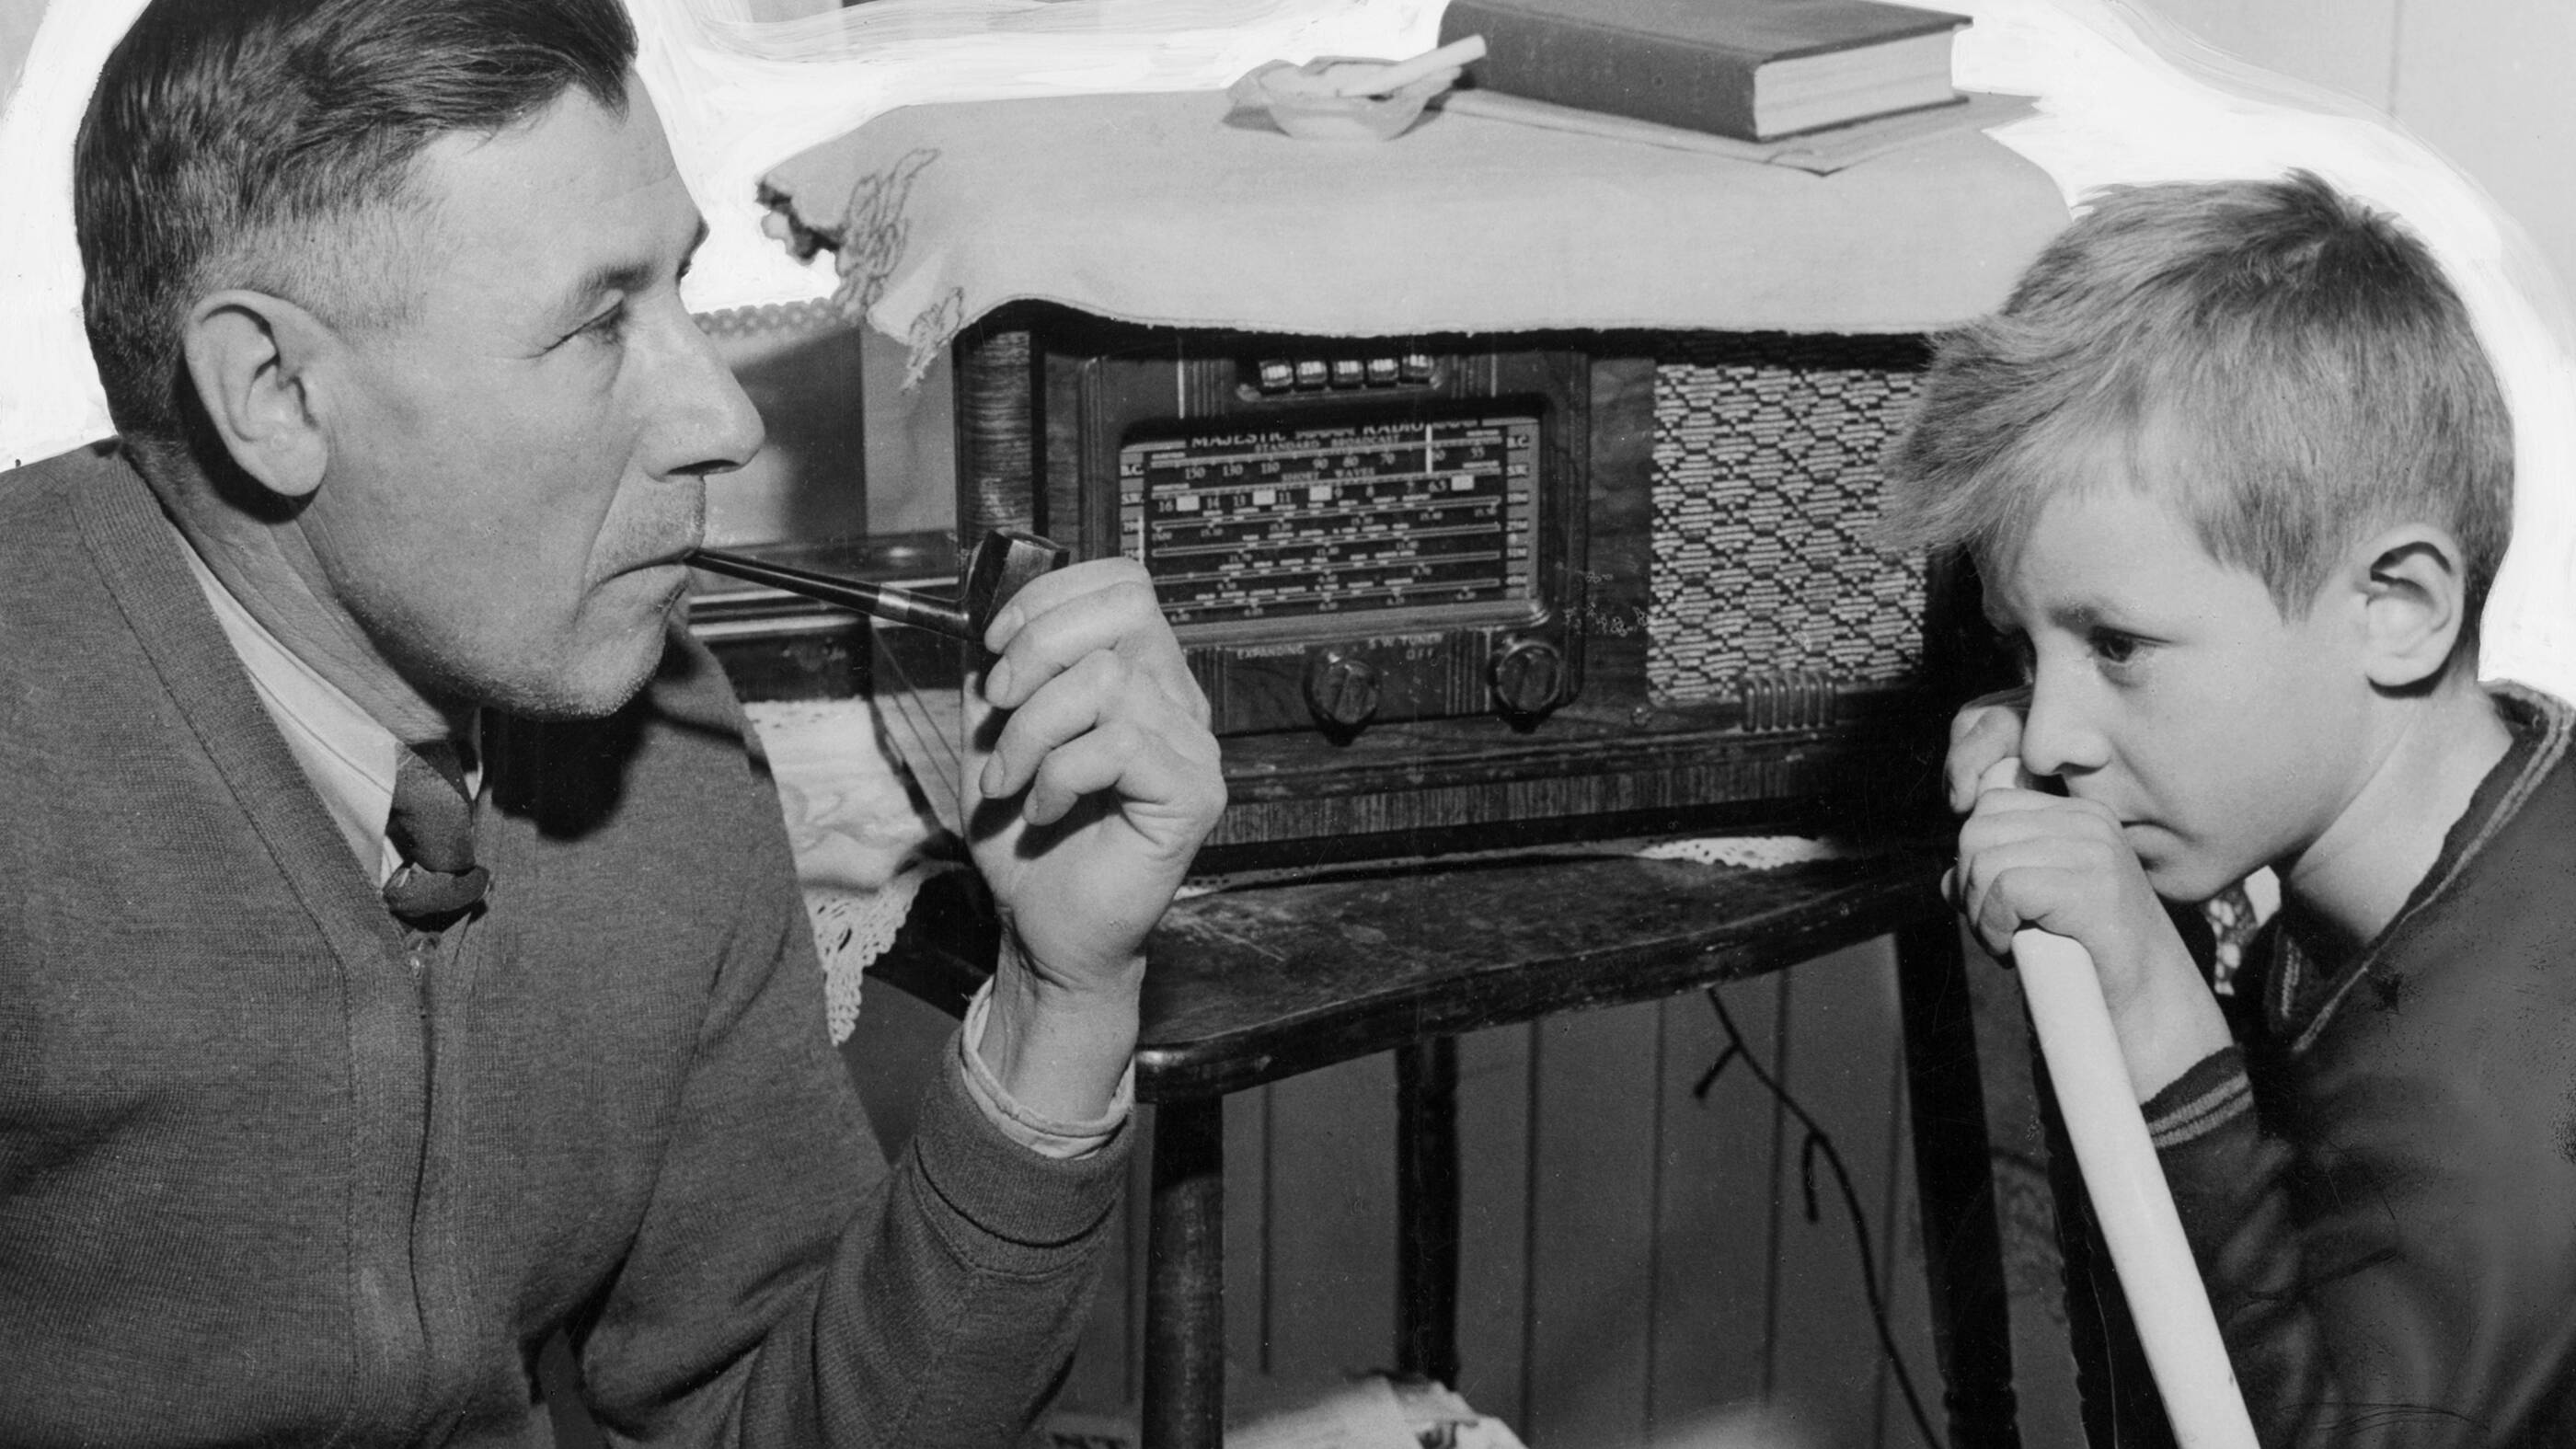 Imperial sponsors Hockey Night in Canada radio broadcasts for the first time. Pictured: Father and son listening to Hockey Night in Canada radio broadcast.

By 1950, three million Canadians listened to Esso hockey broadcasts each week  and in 1952, we expanded our broadcast sponsorship to include television.
Watch the Hockey Night in Canada final scores.

Learn more about history with hockey.